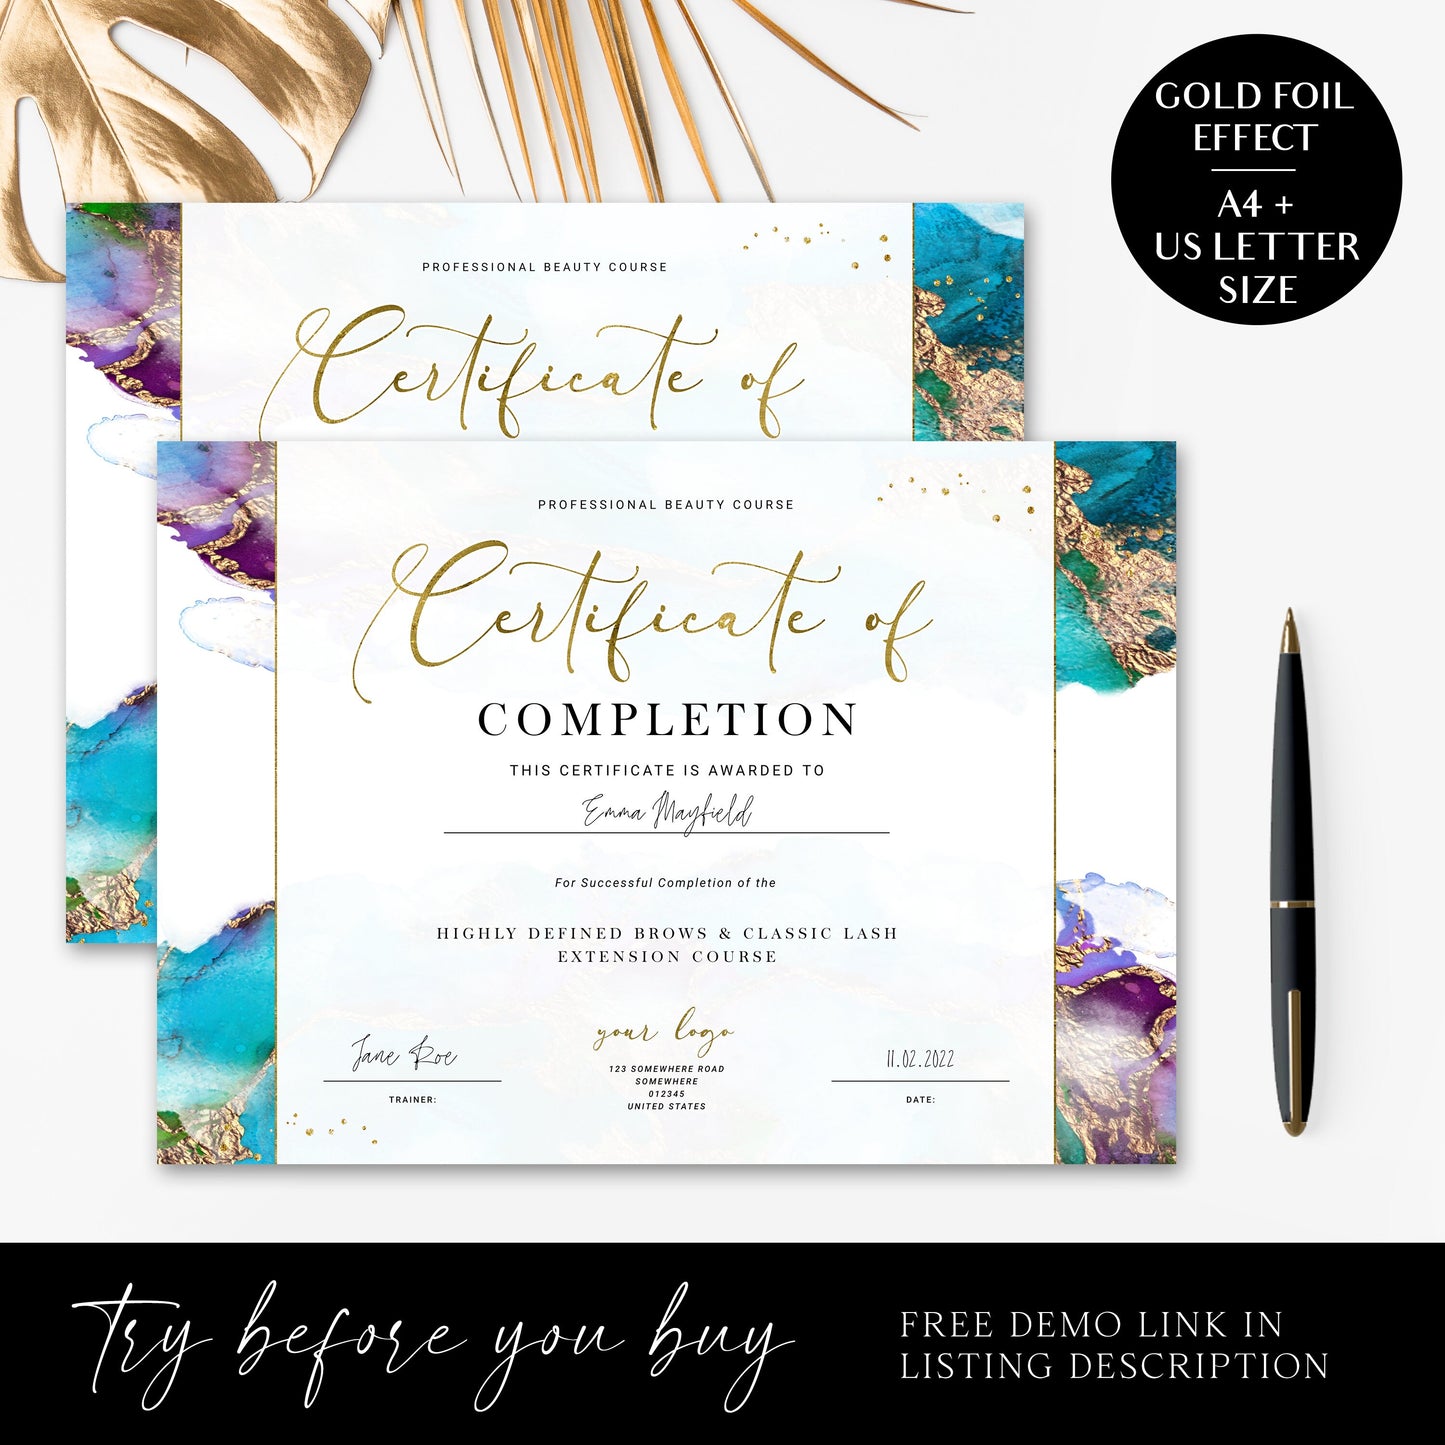 Certificate of Completion Editable Template, DIY Award Certificate, Beauty Business Course Certificate, Printable Certificate Gold DJ-001